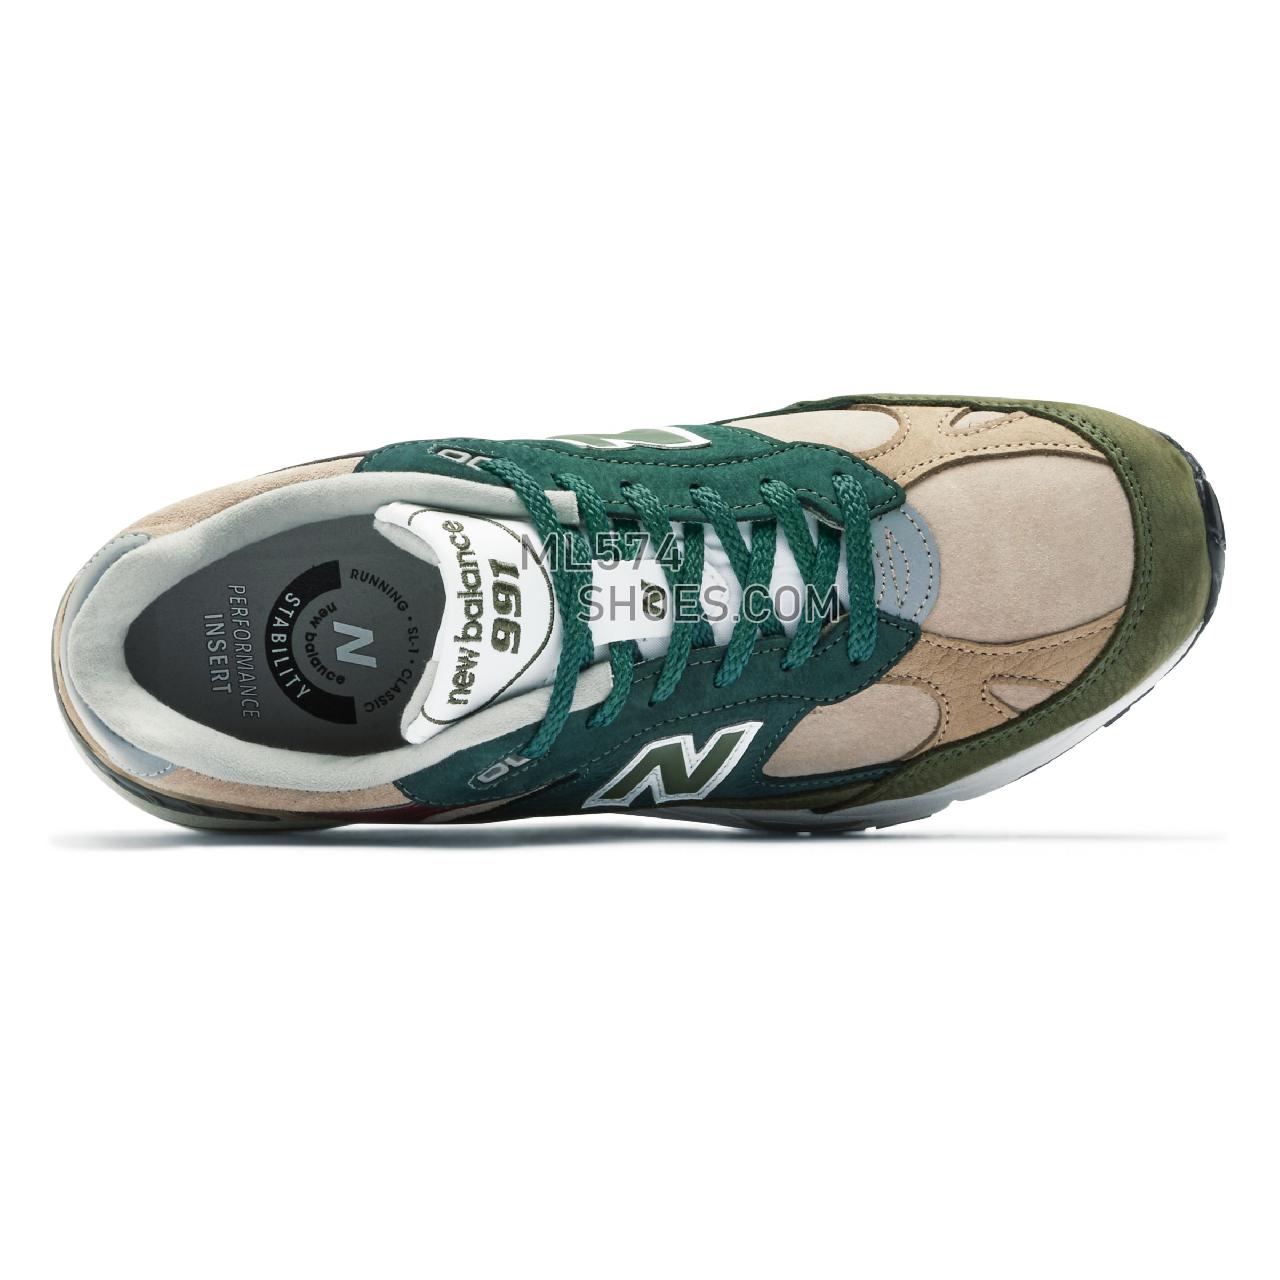 New Balance Made in UK 991 - Men's Made in USA And UK Sneakers - Beige with green and teal - M991NTG